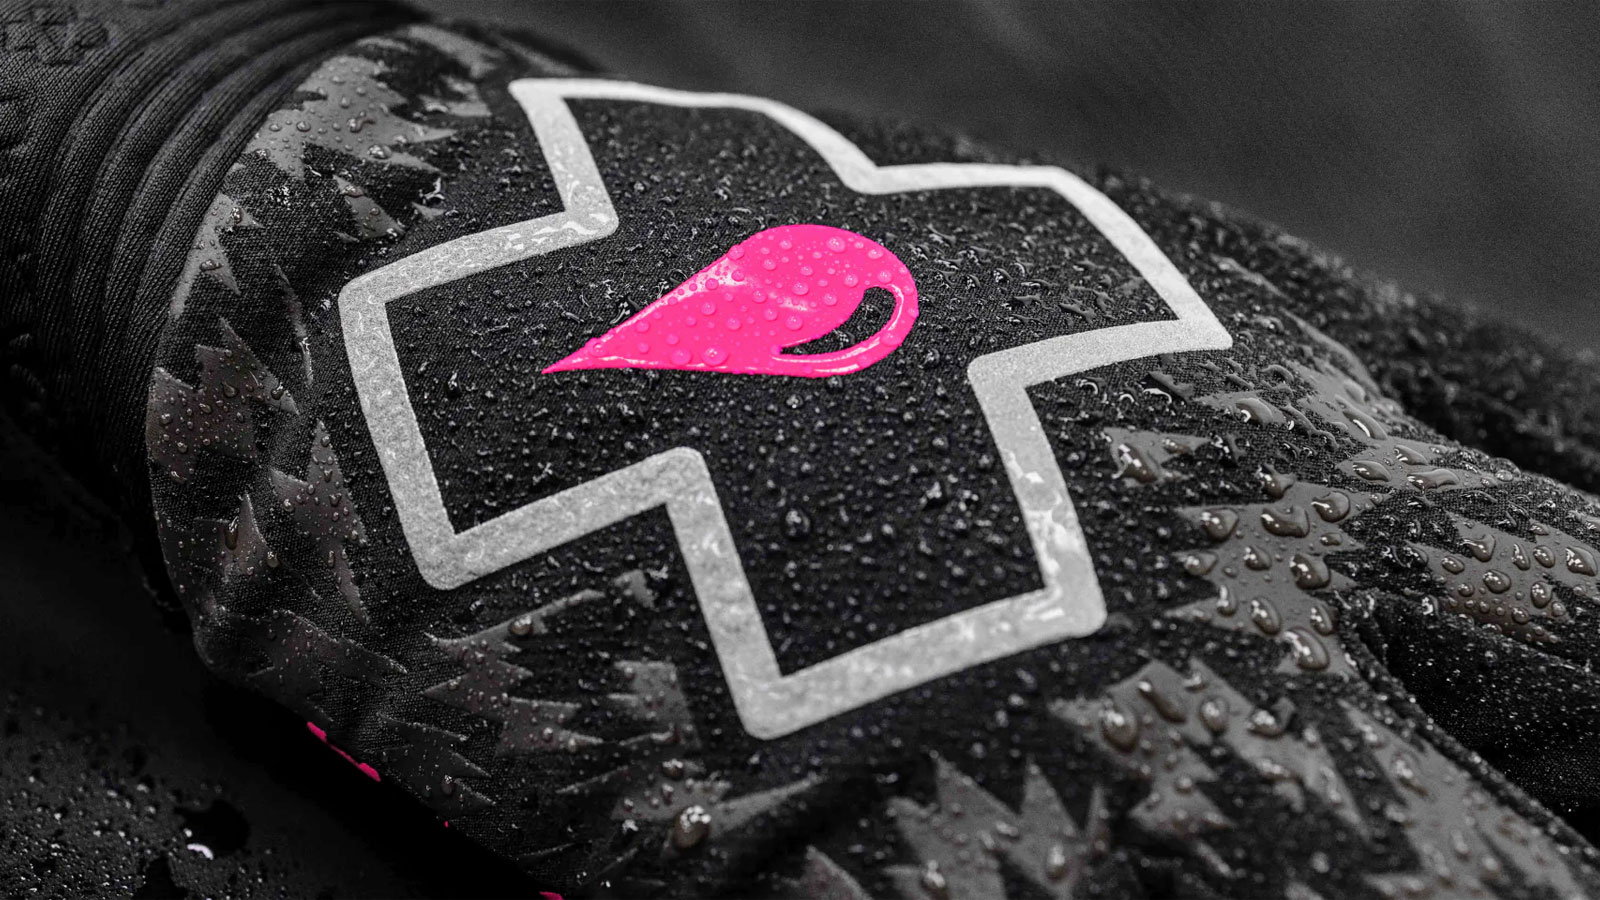 Muc-Off Winter Rider Gloves offer Thinsulate insulation for MTB weather protection, DWR coated